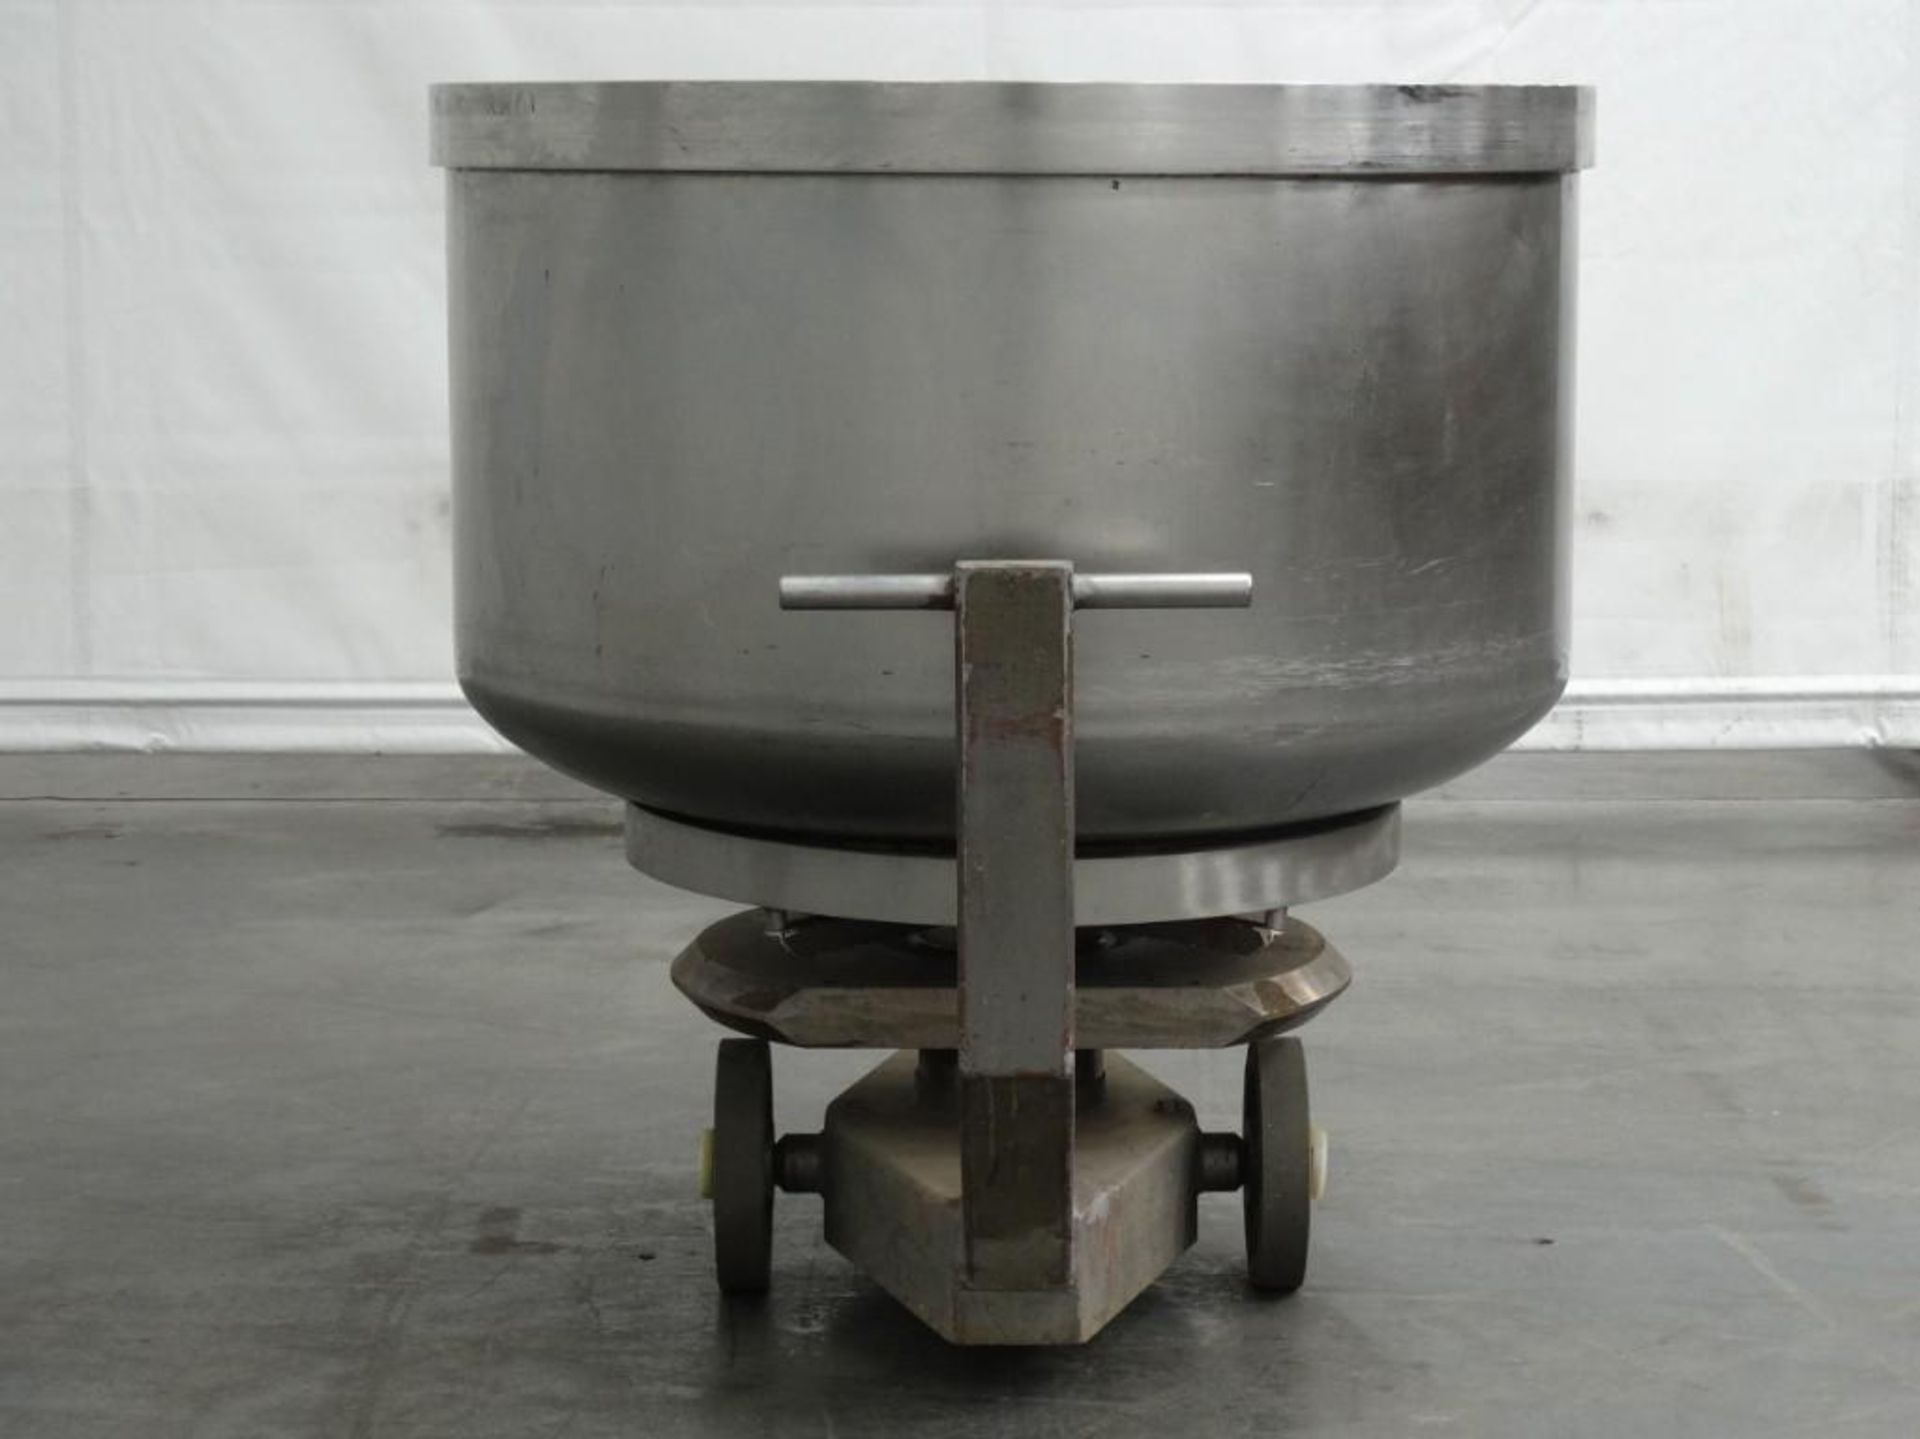 VMI 175 Gallon Rotating Stainless Steel Mixing Bowl and Dolly - Image 3 of 6